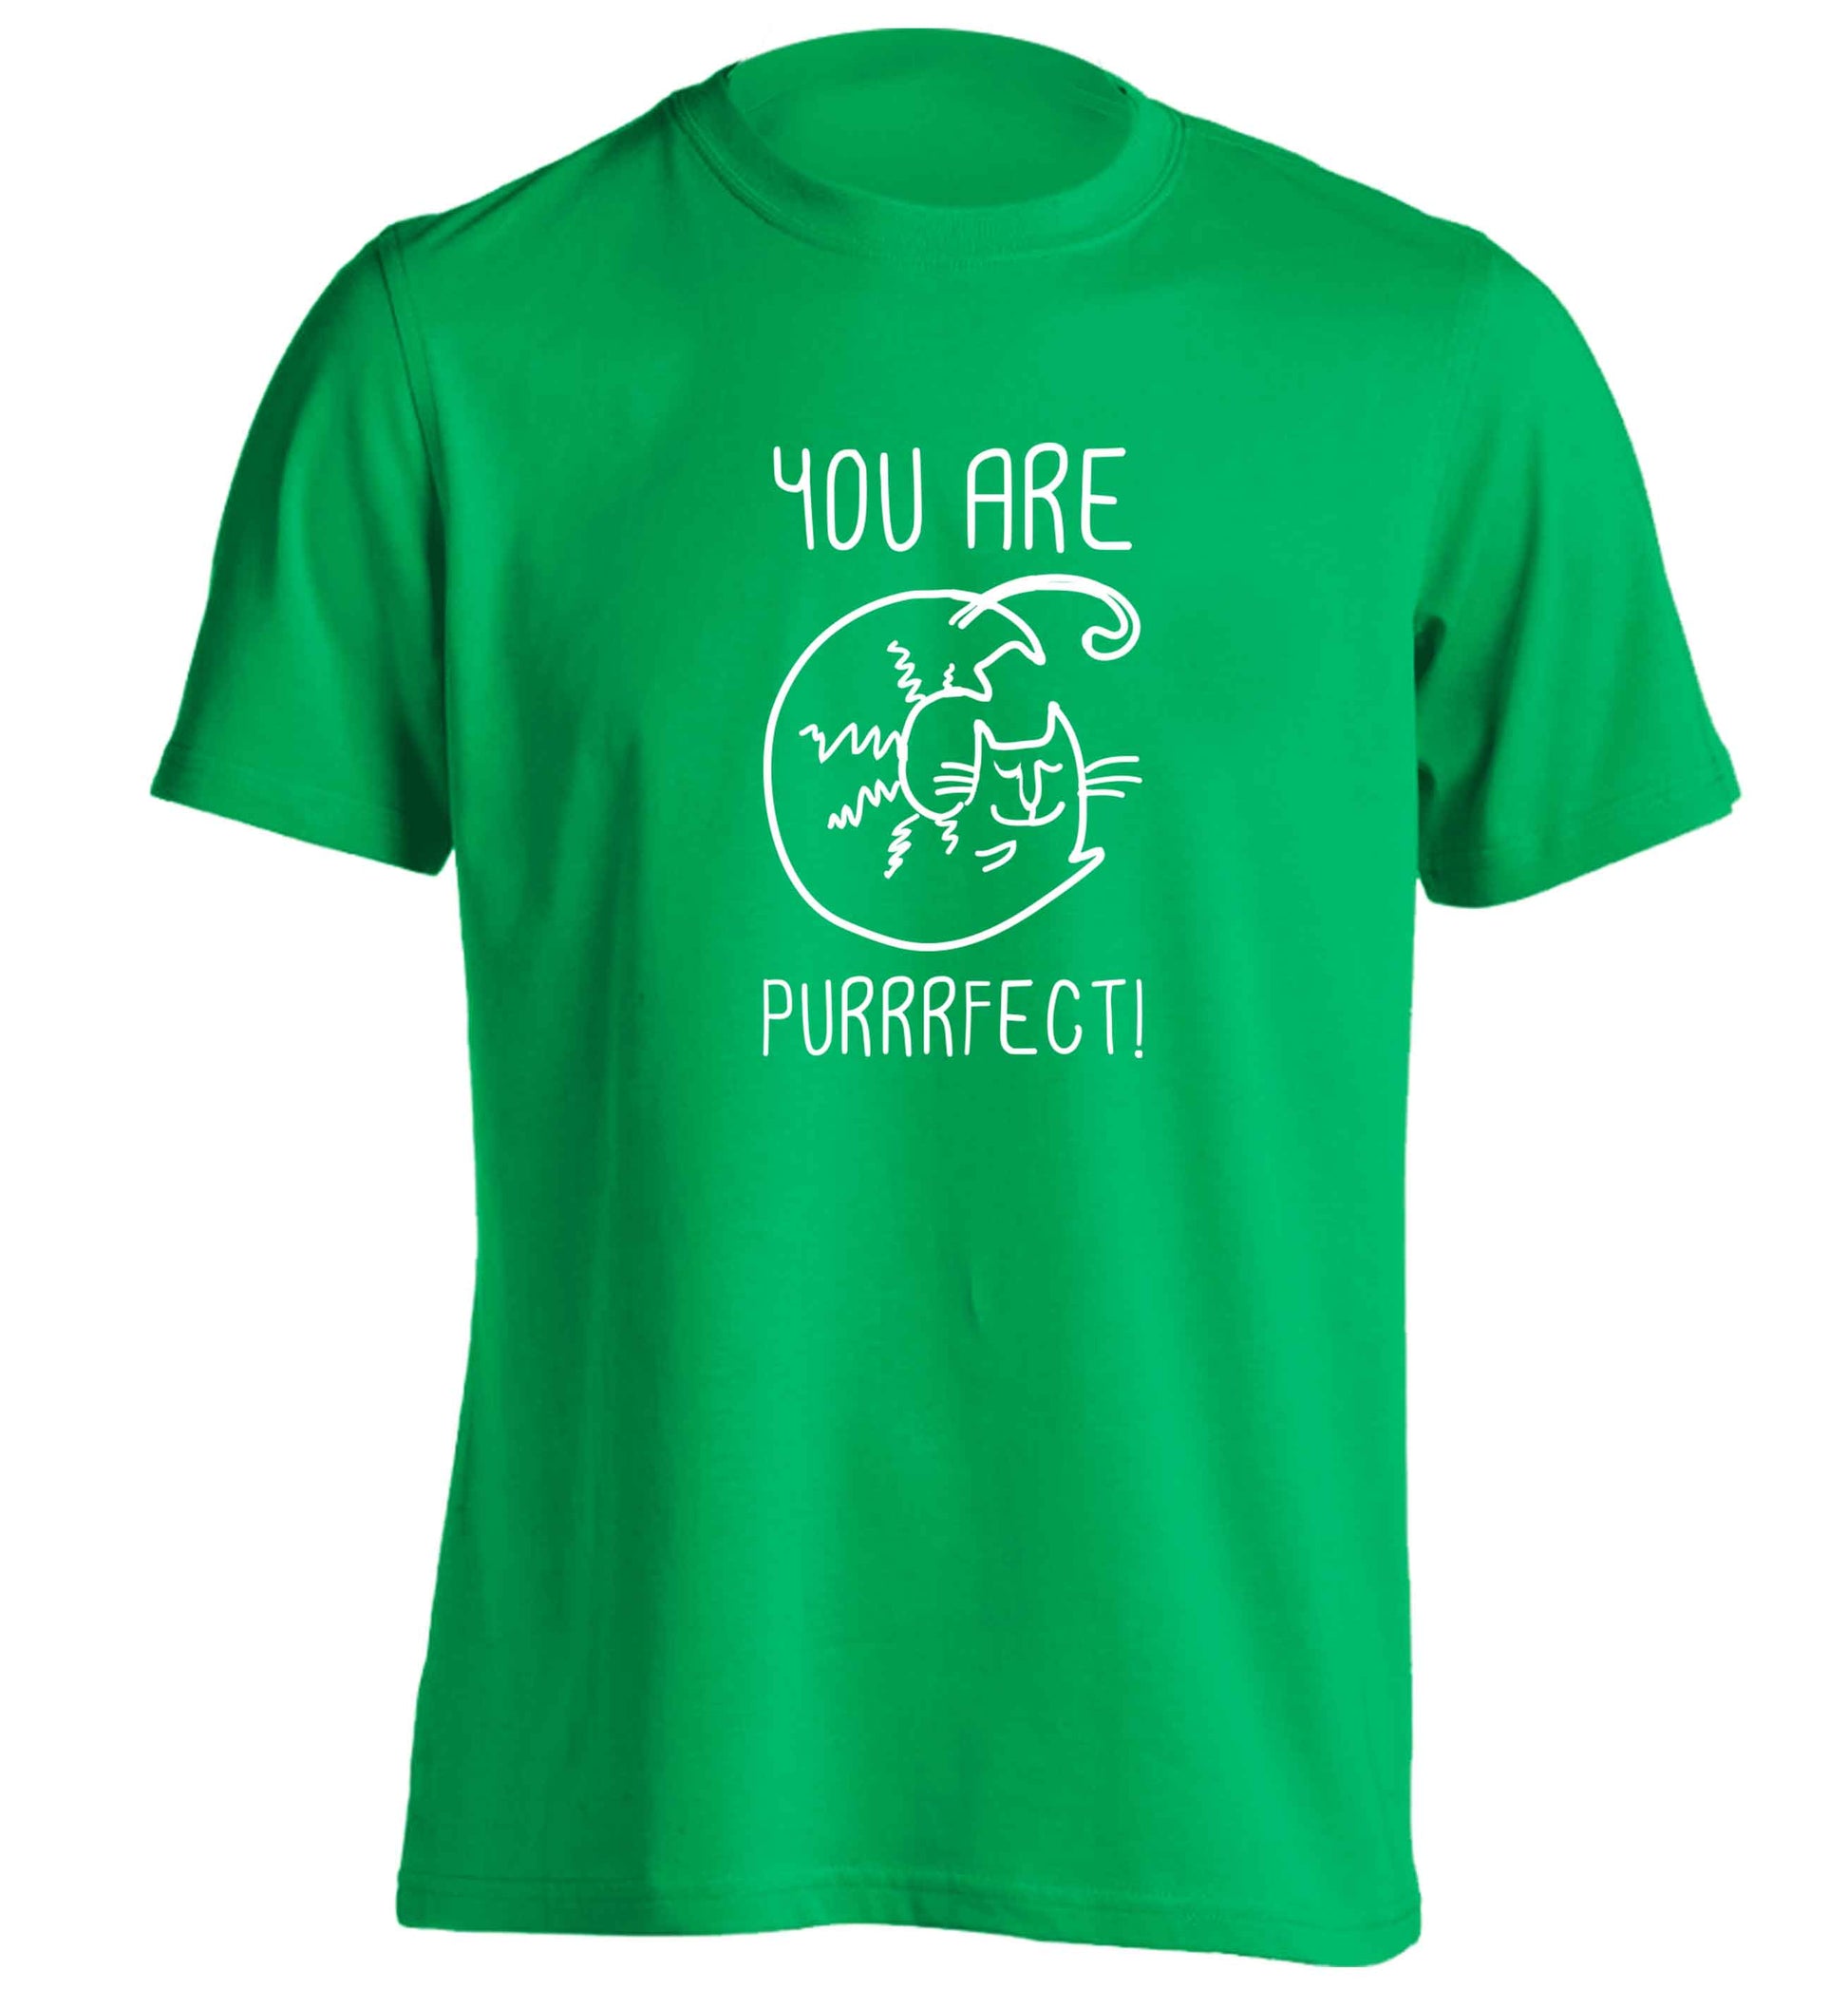 You are purrfect adults unisex green Tshirt 2XL